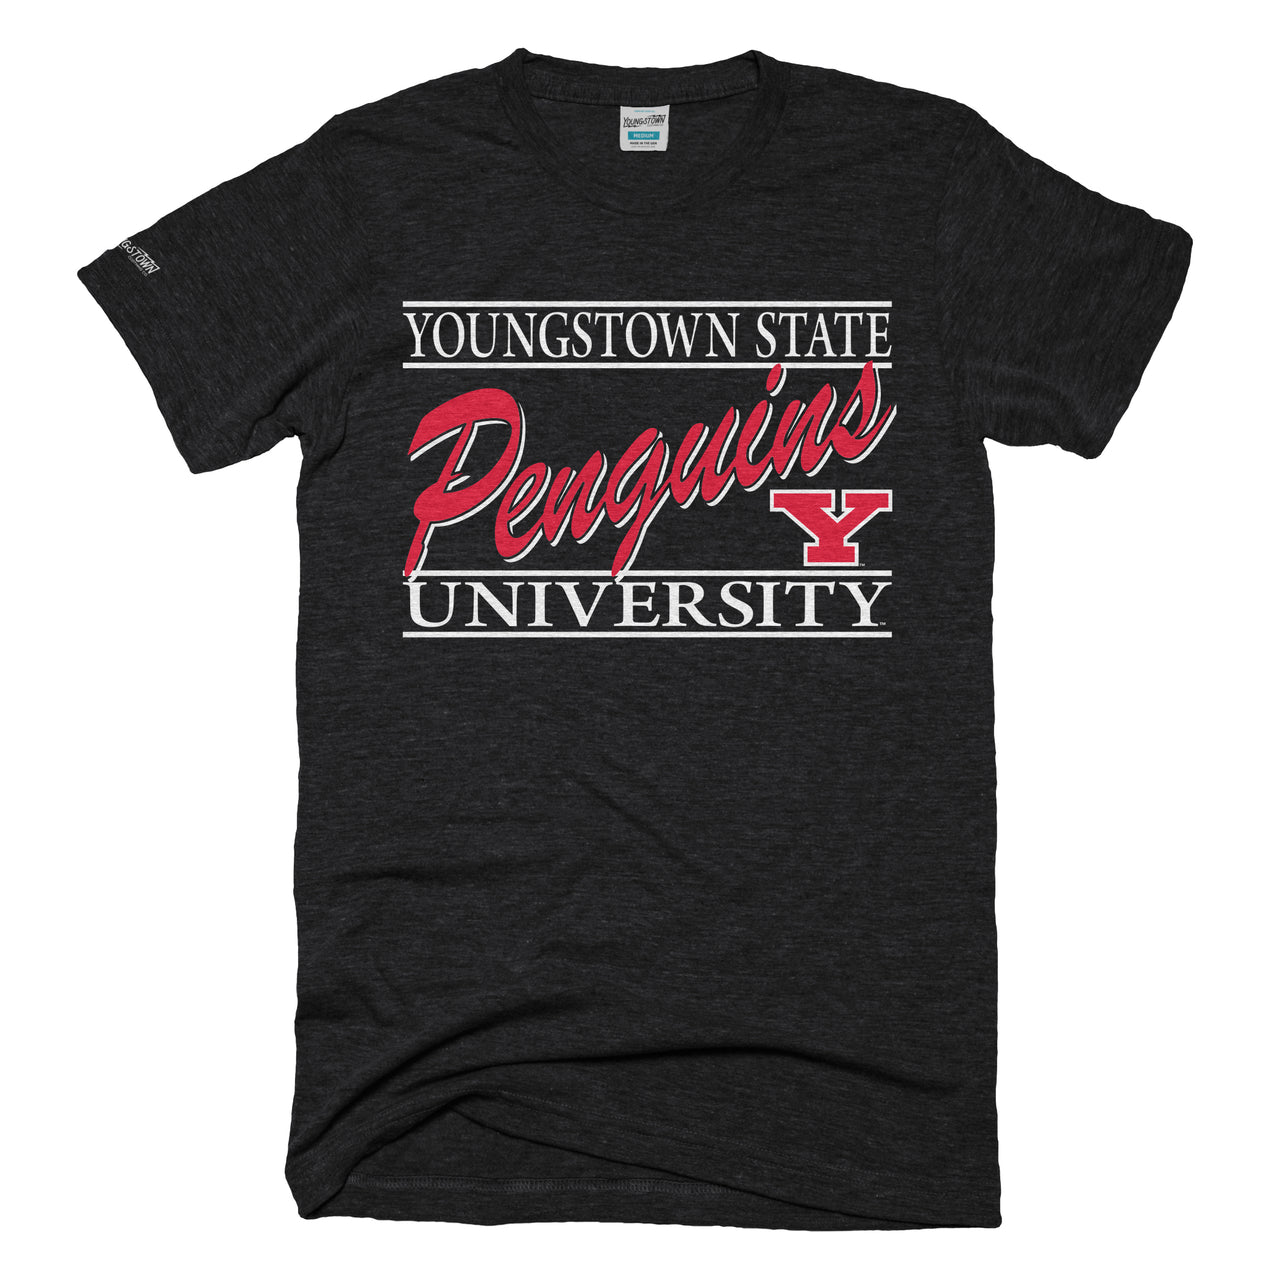 Youngstown State University Ties, Youngstown State University Neck